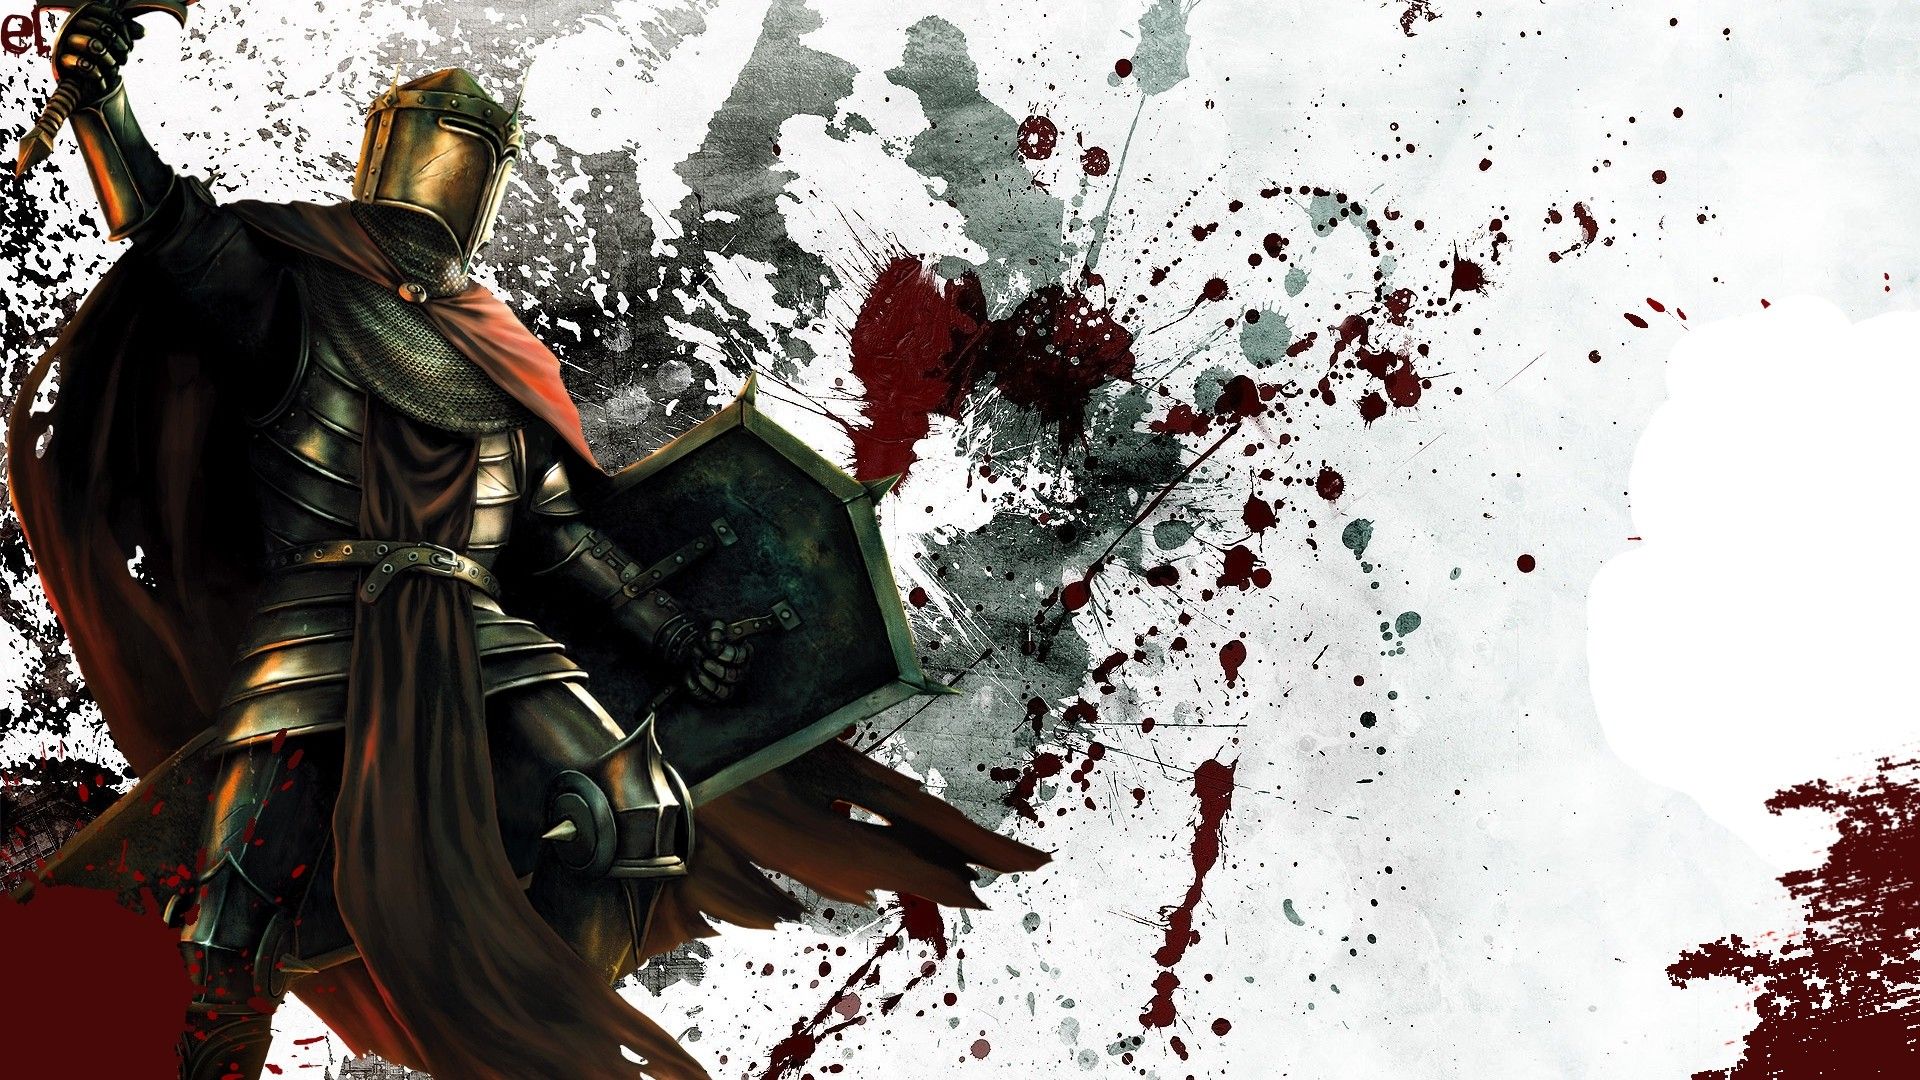 Gallery for - medieval knights fighting wallpaper